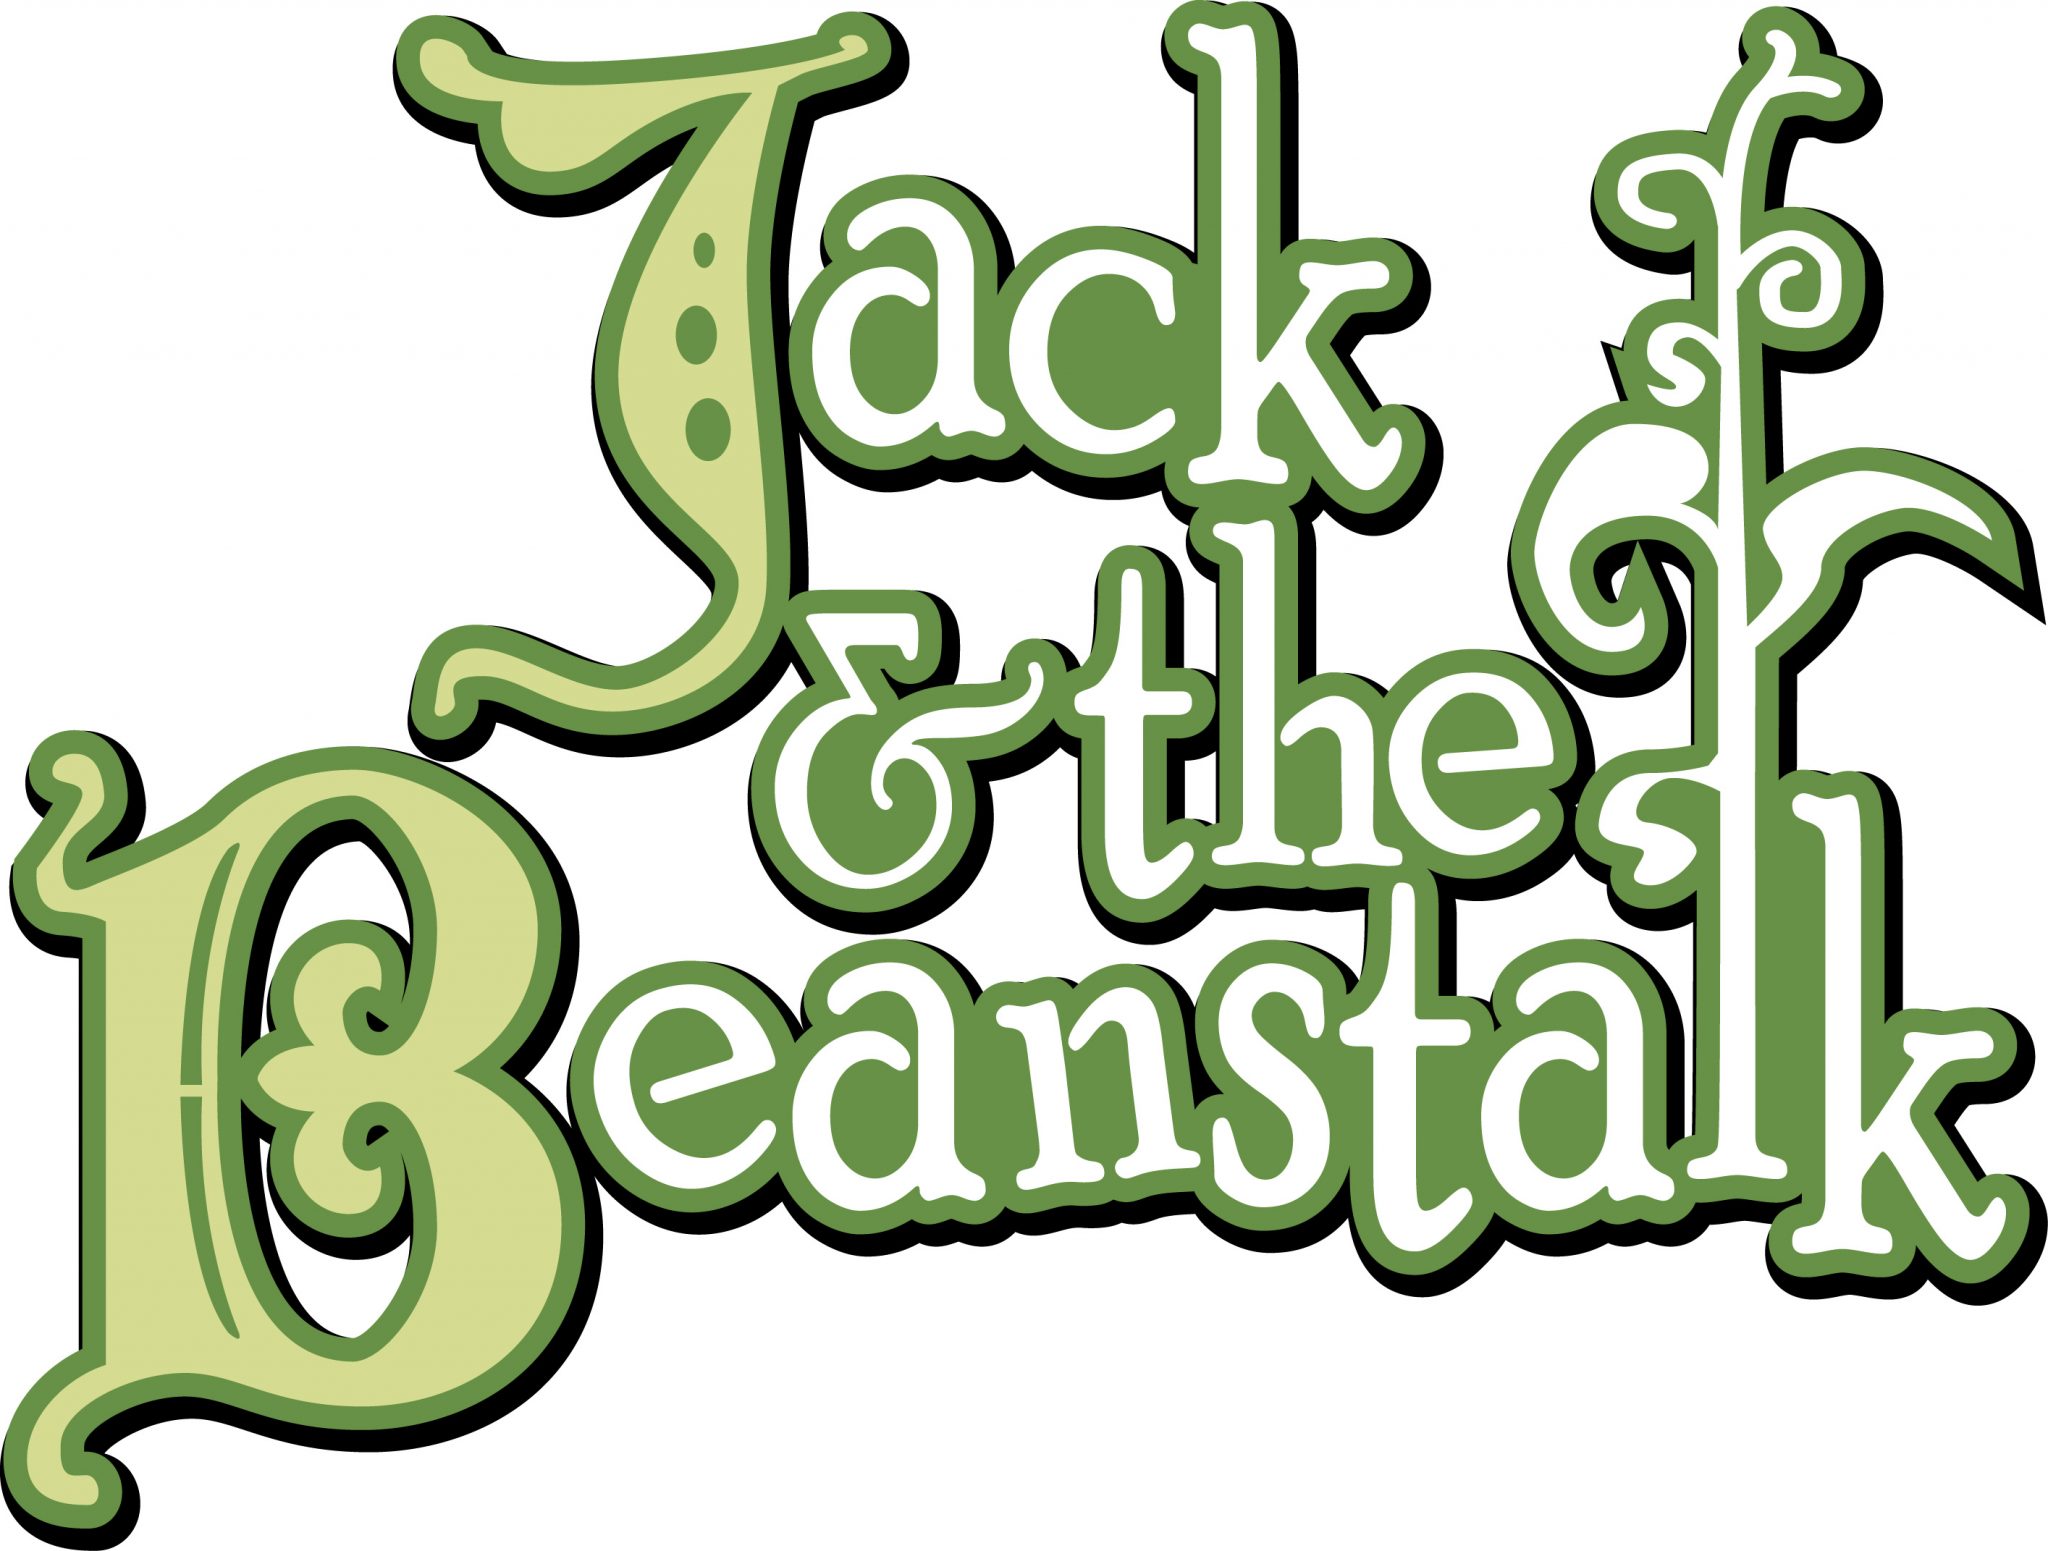 jack-and-the-beanstalk-ariel